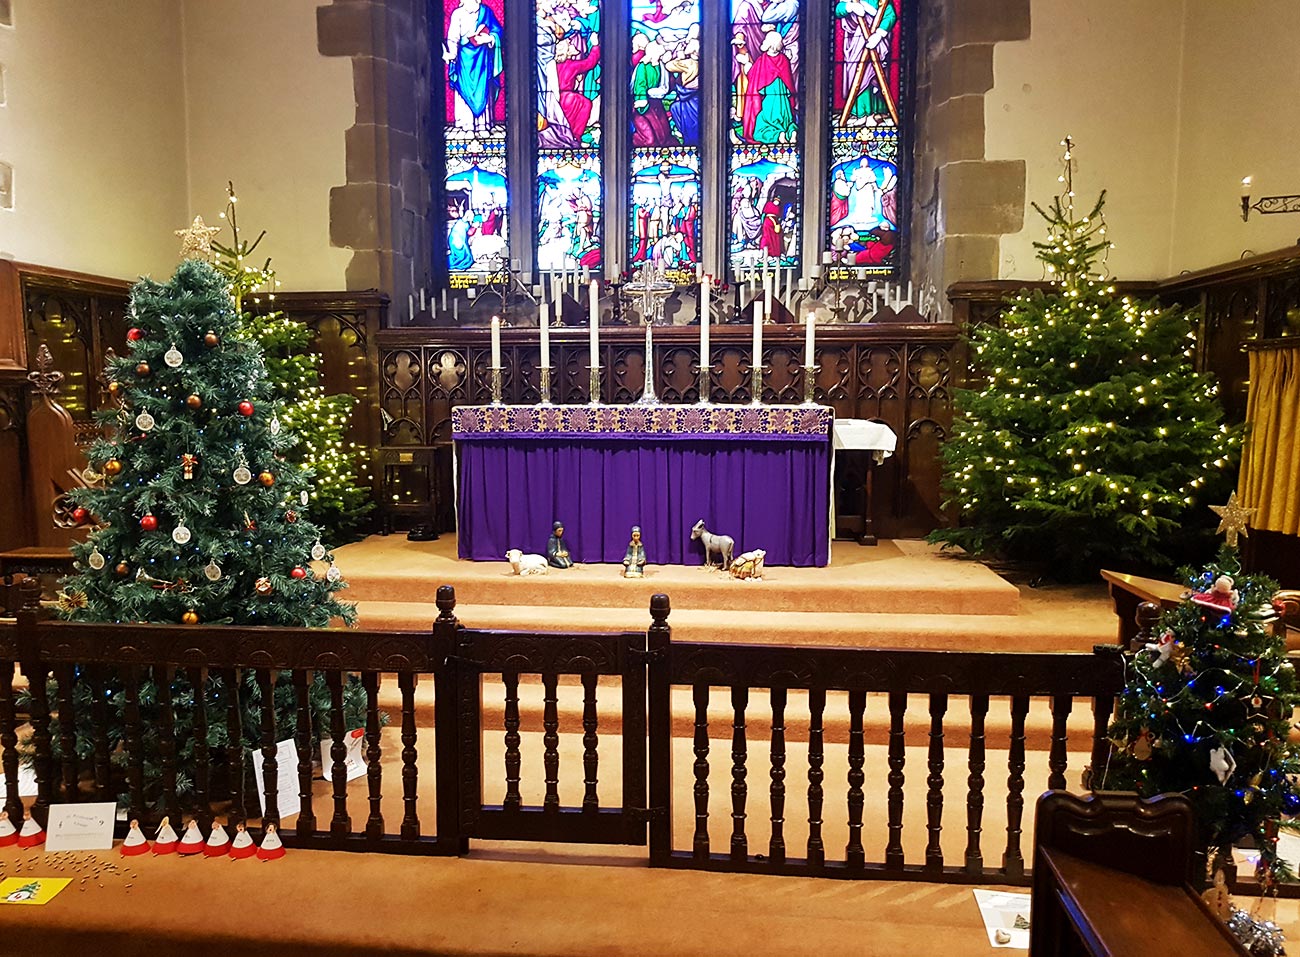 Christmas Trees by the High Altar.